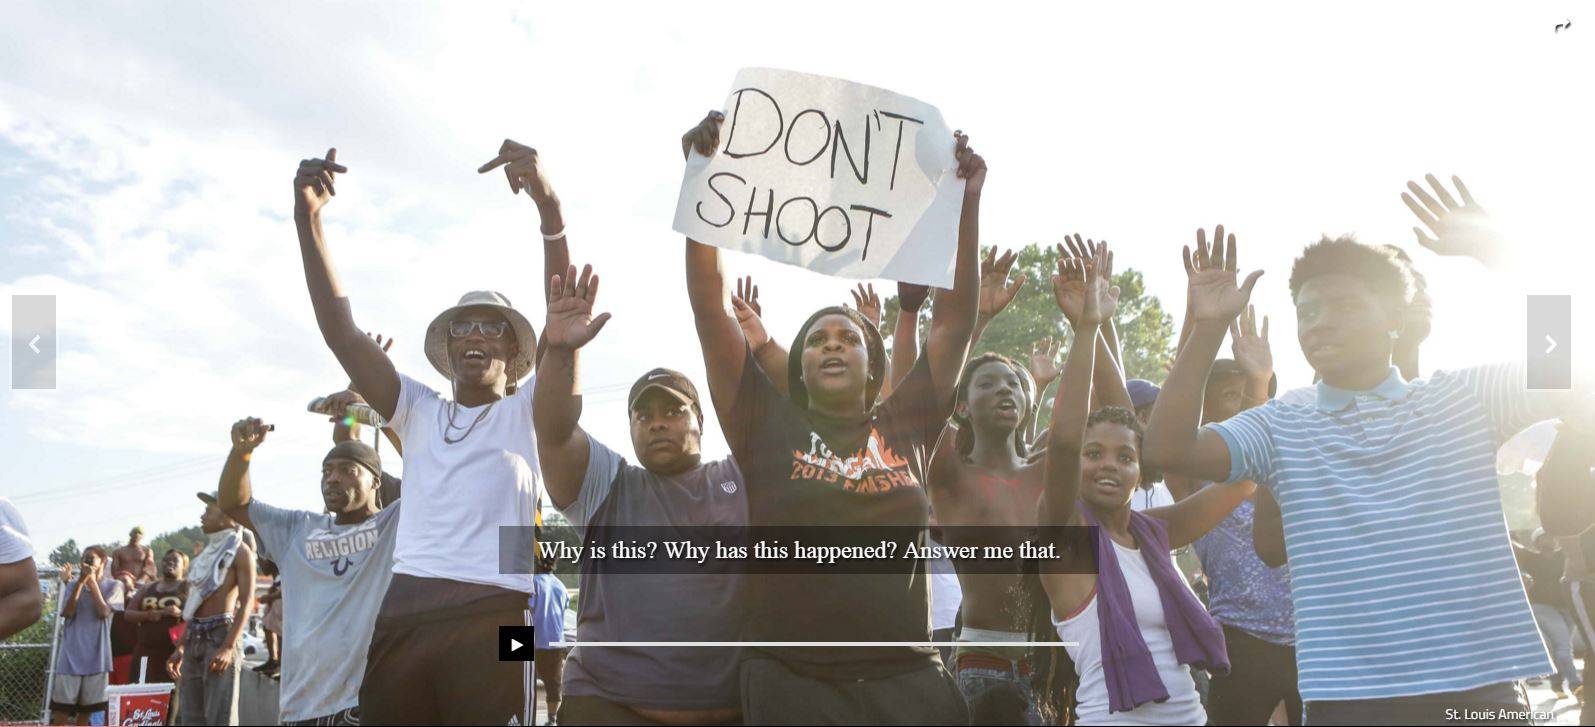 Protestors in Ferguson chanted, "Hands up! Don't shoot!" (photo by Wiley Price, Saint Louis American)